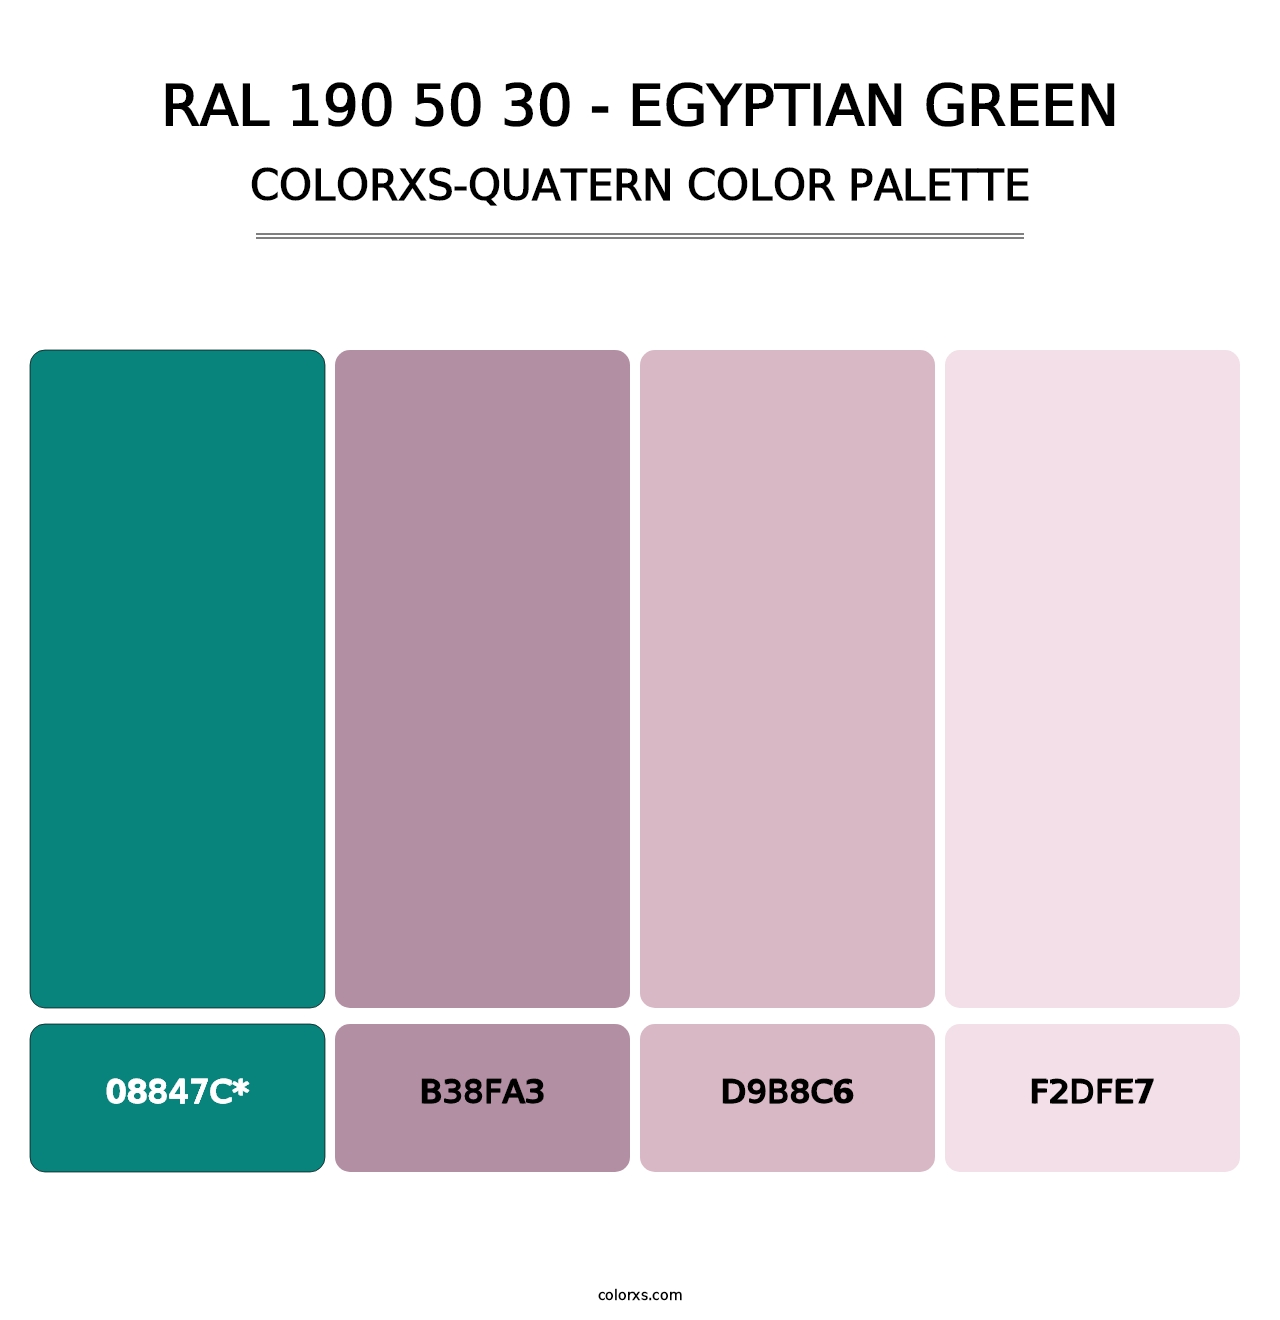 RAL 190 50 30 - Egyptian Green - Colorxs Quatern Palette